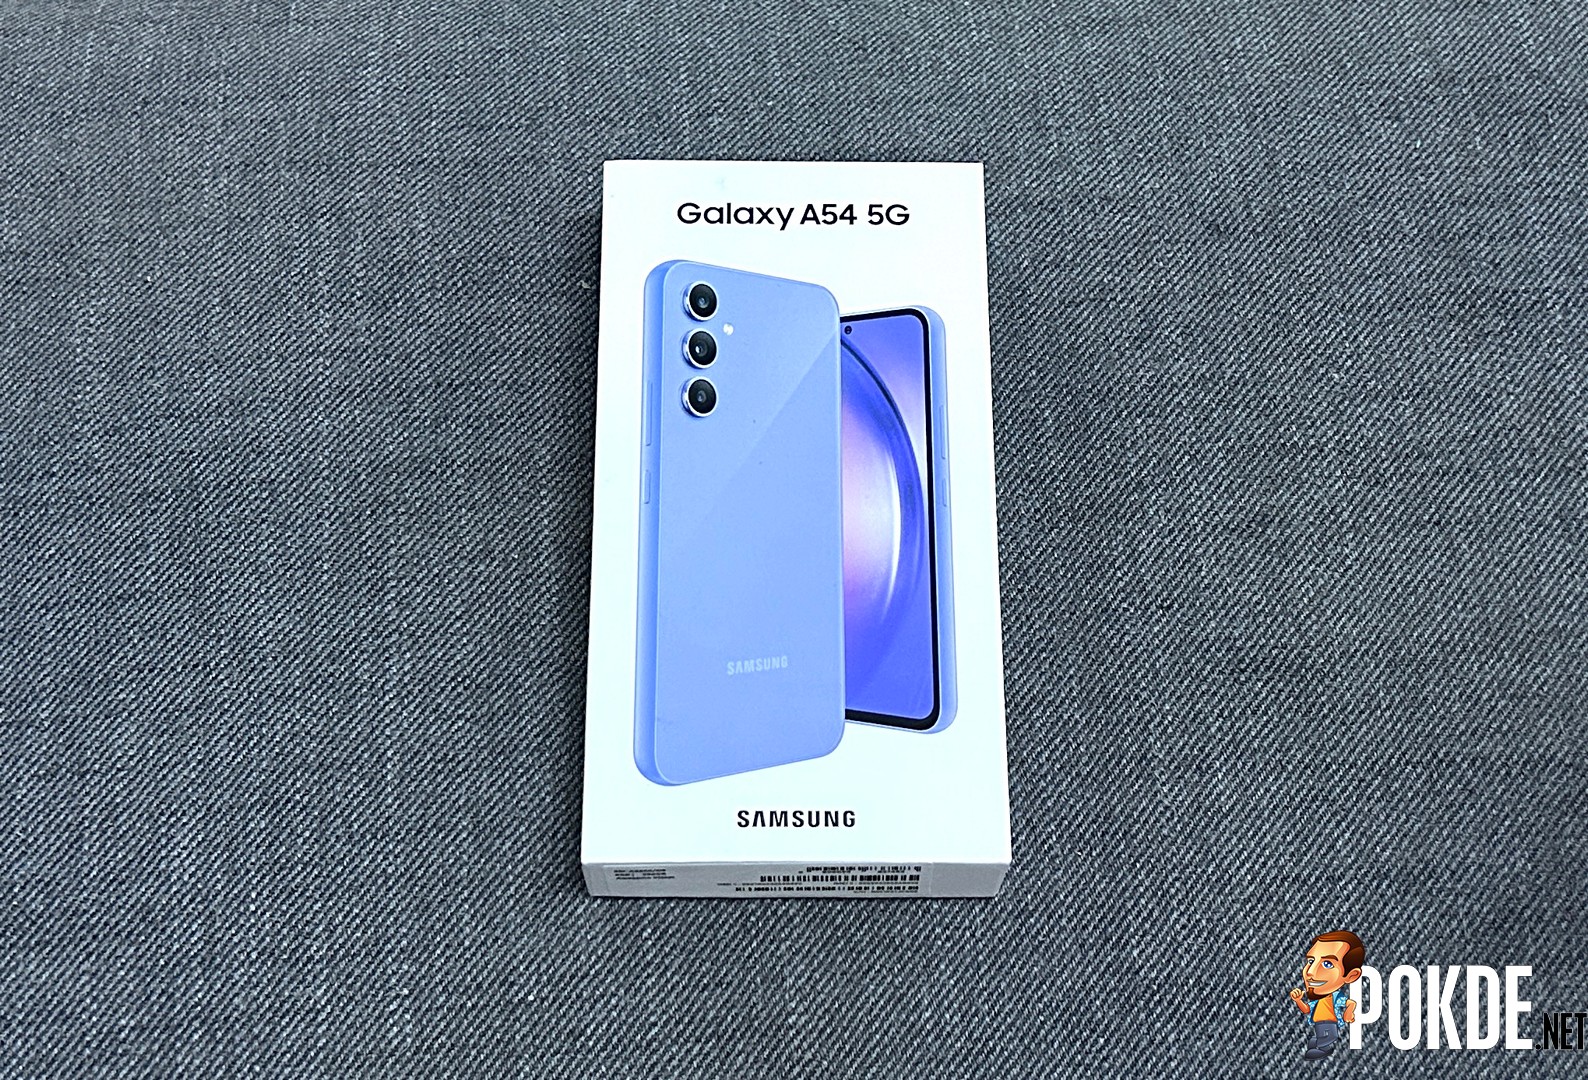 Awesome Worry-Free Ownership Experience with Galaxy A54 5G